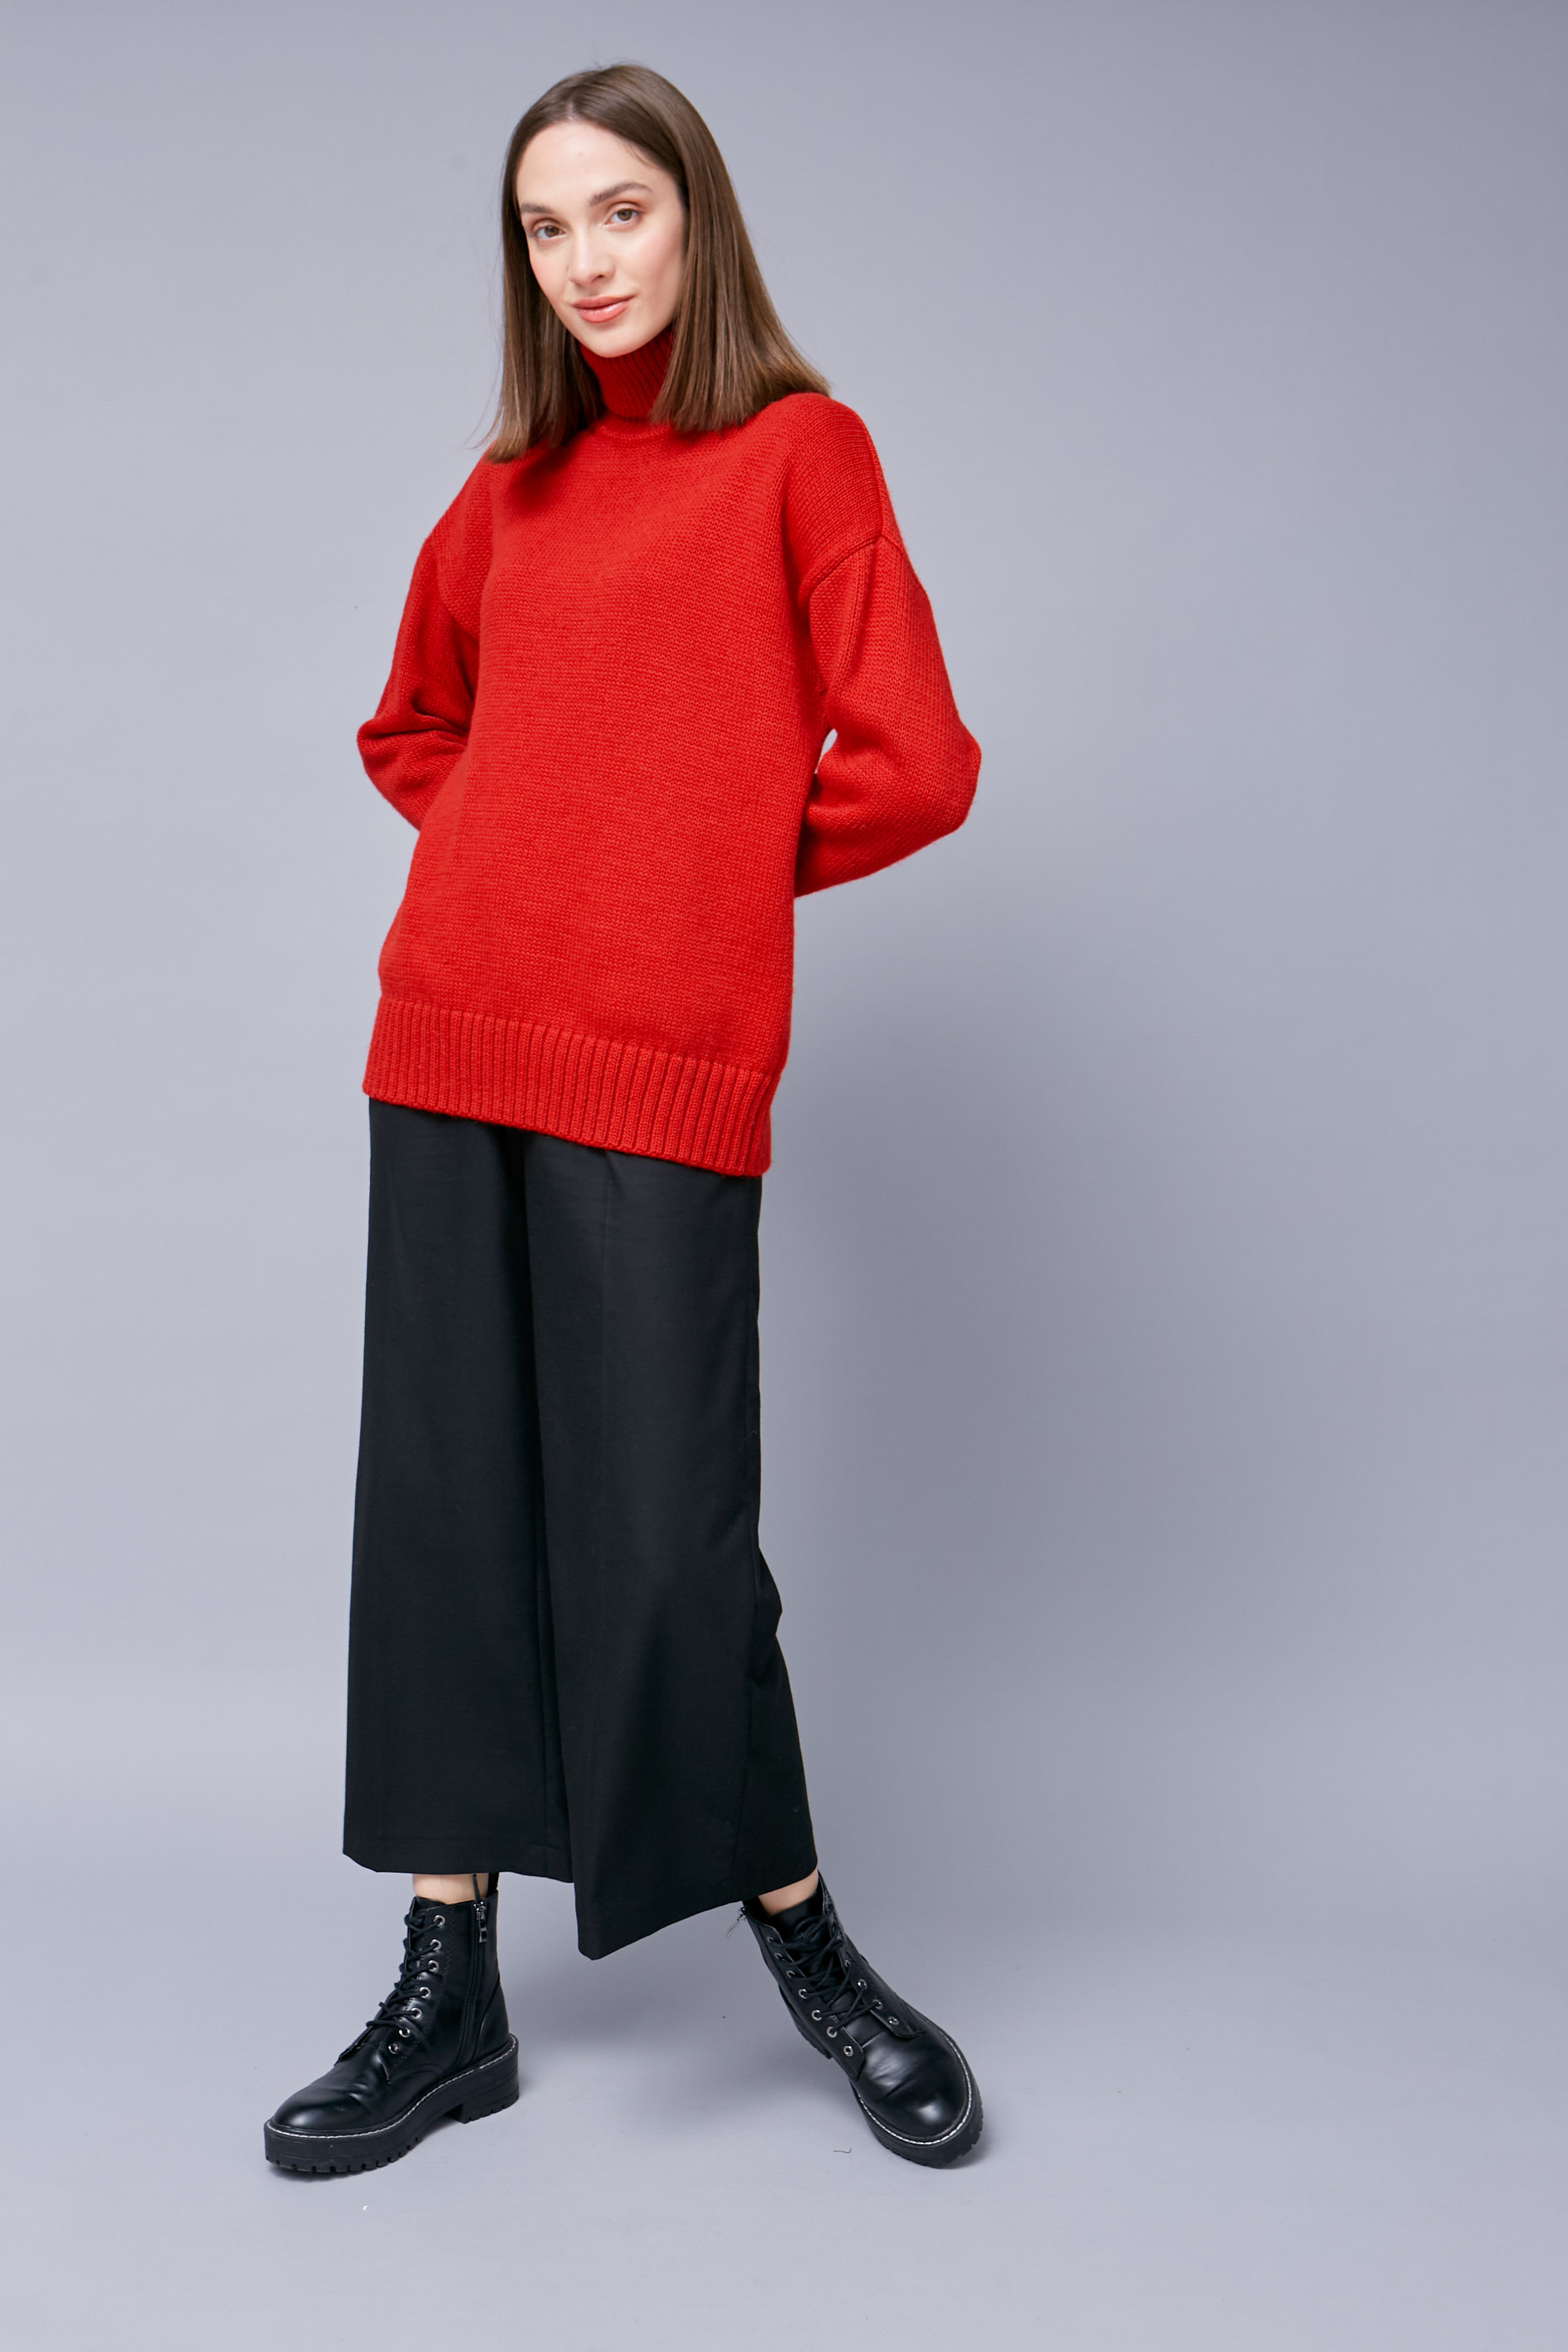 Red knit turtleneck sweater, photo 2